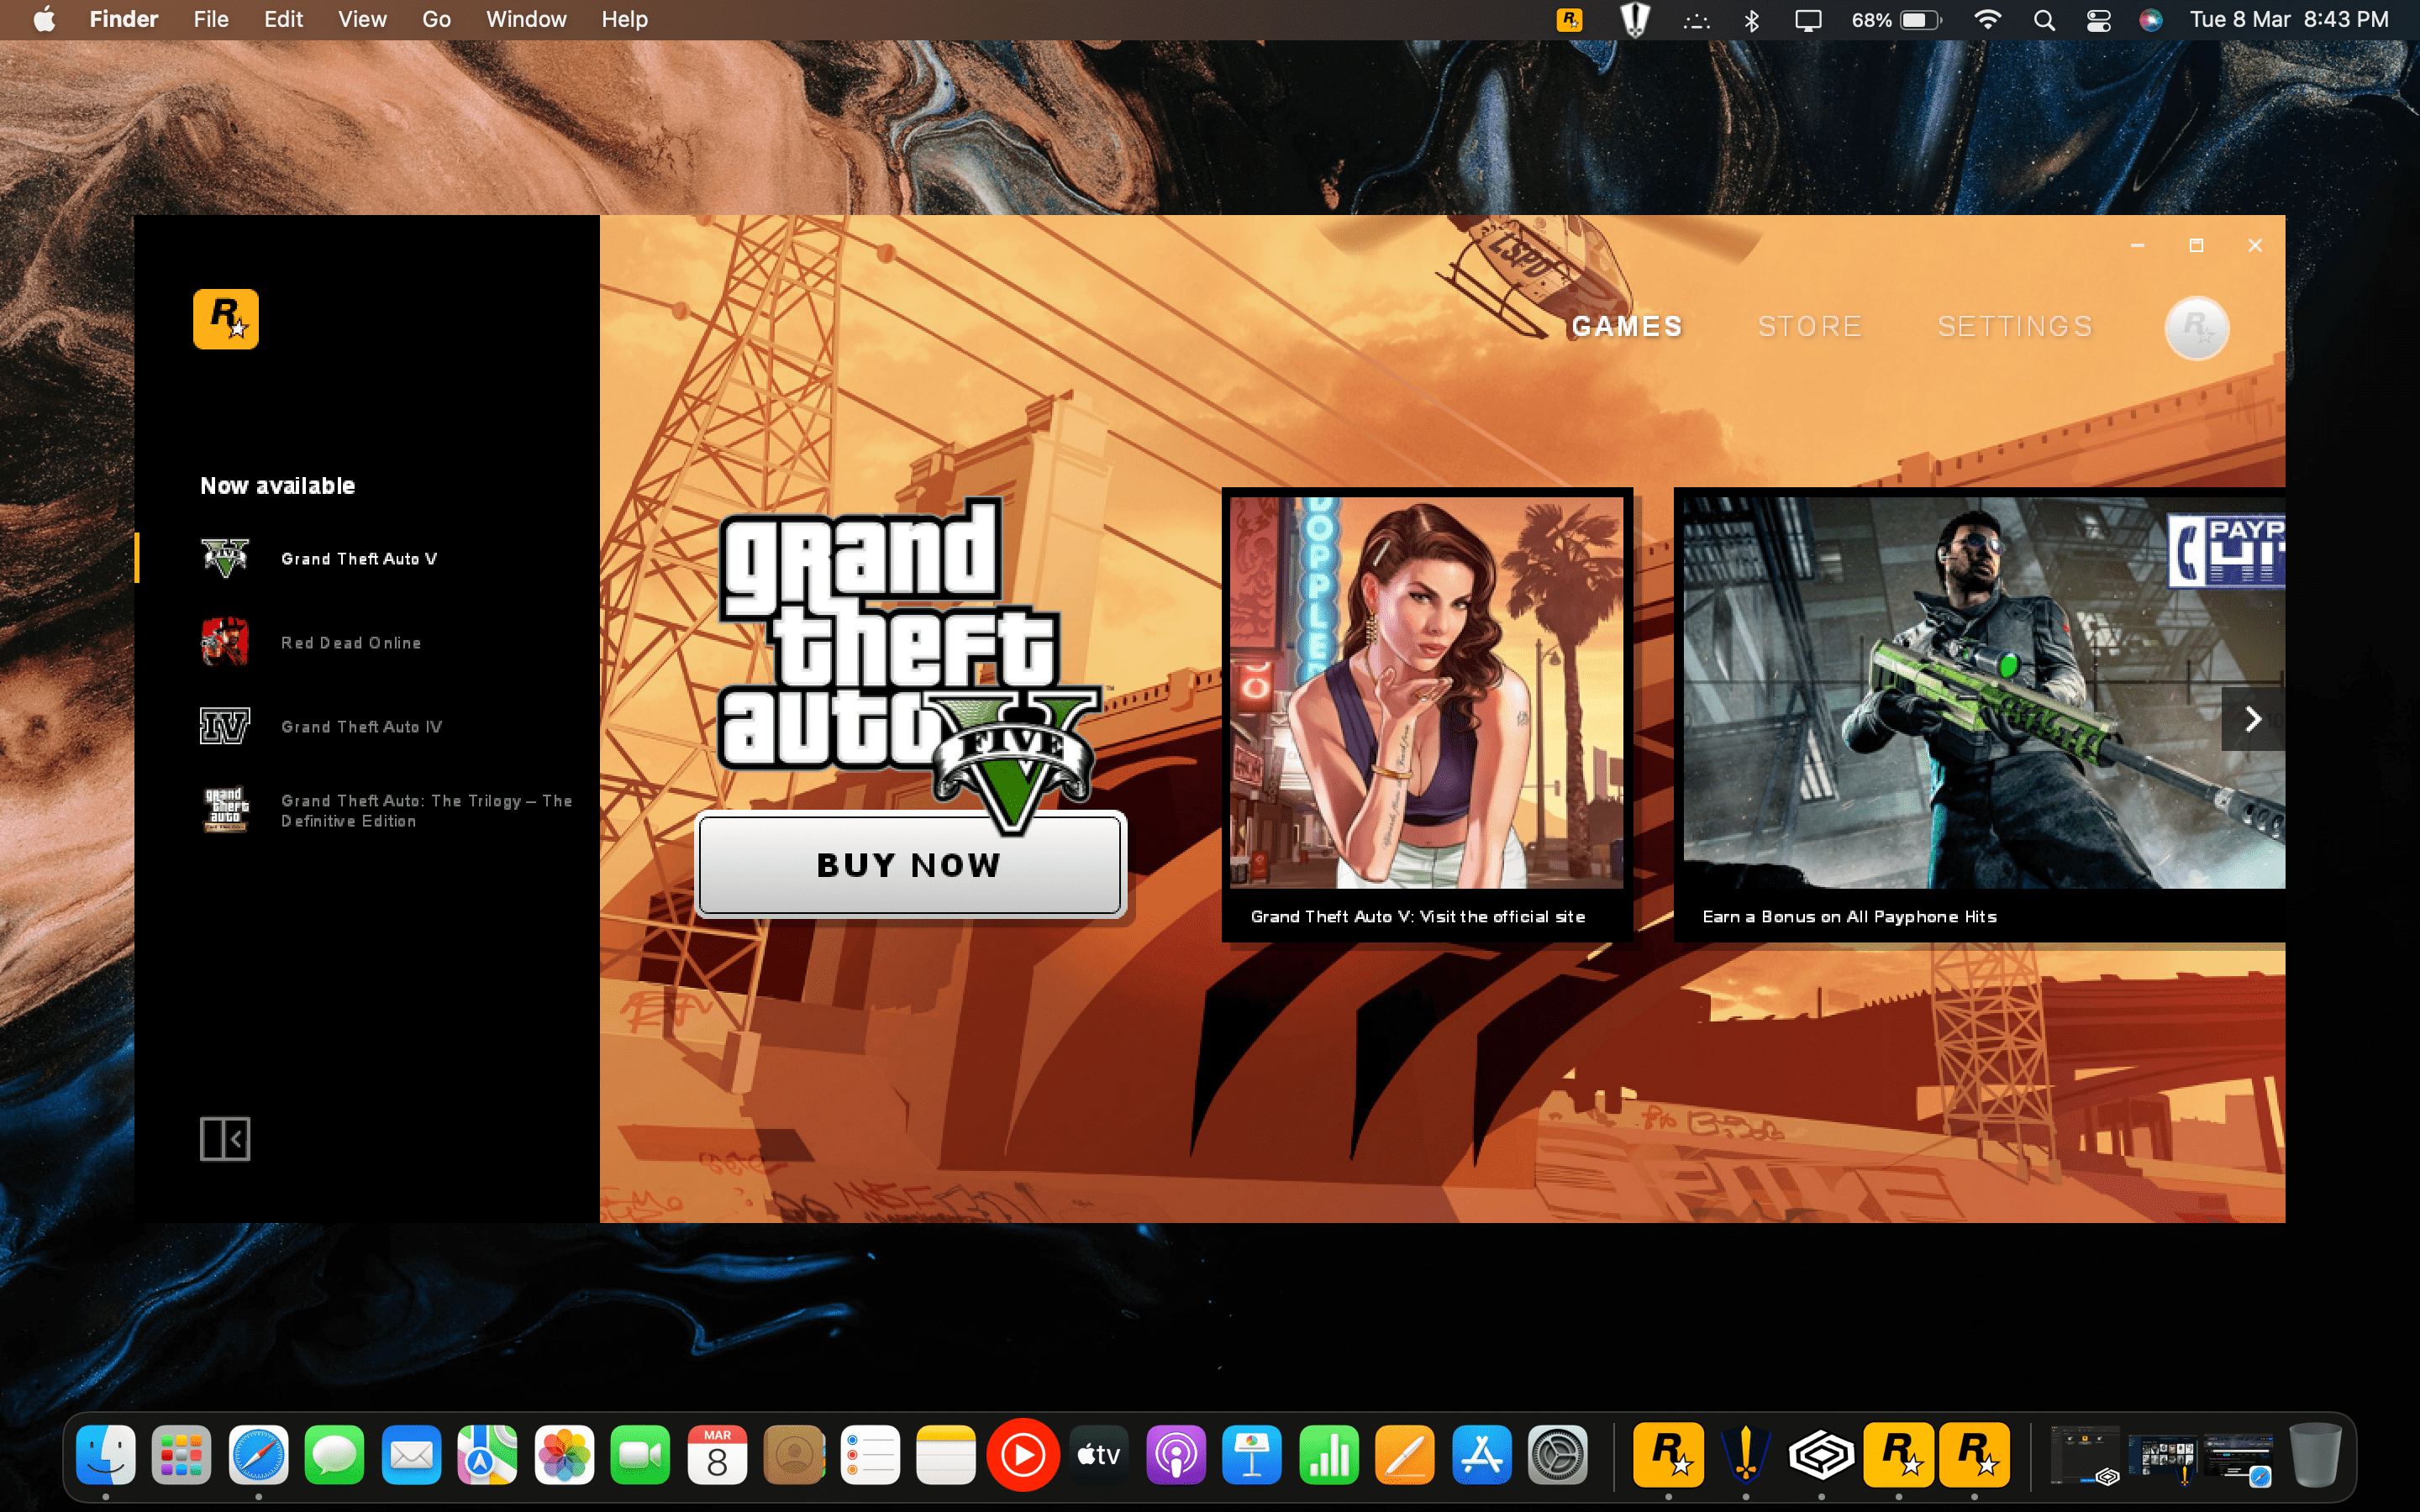 How to Download Rockstar Launcher: 5 Steps (with Pictures)